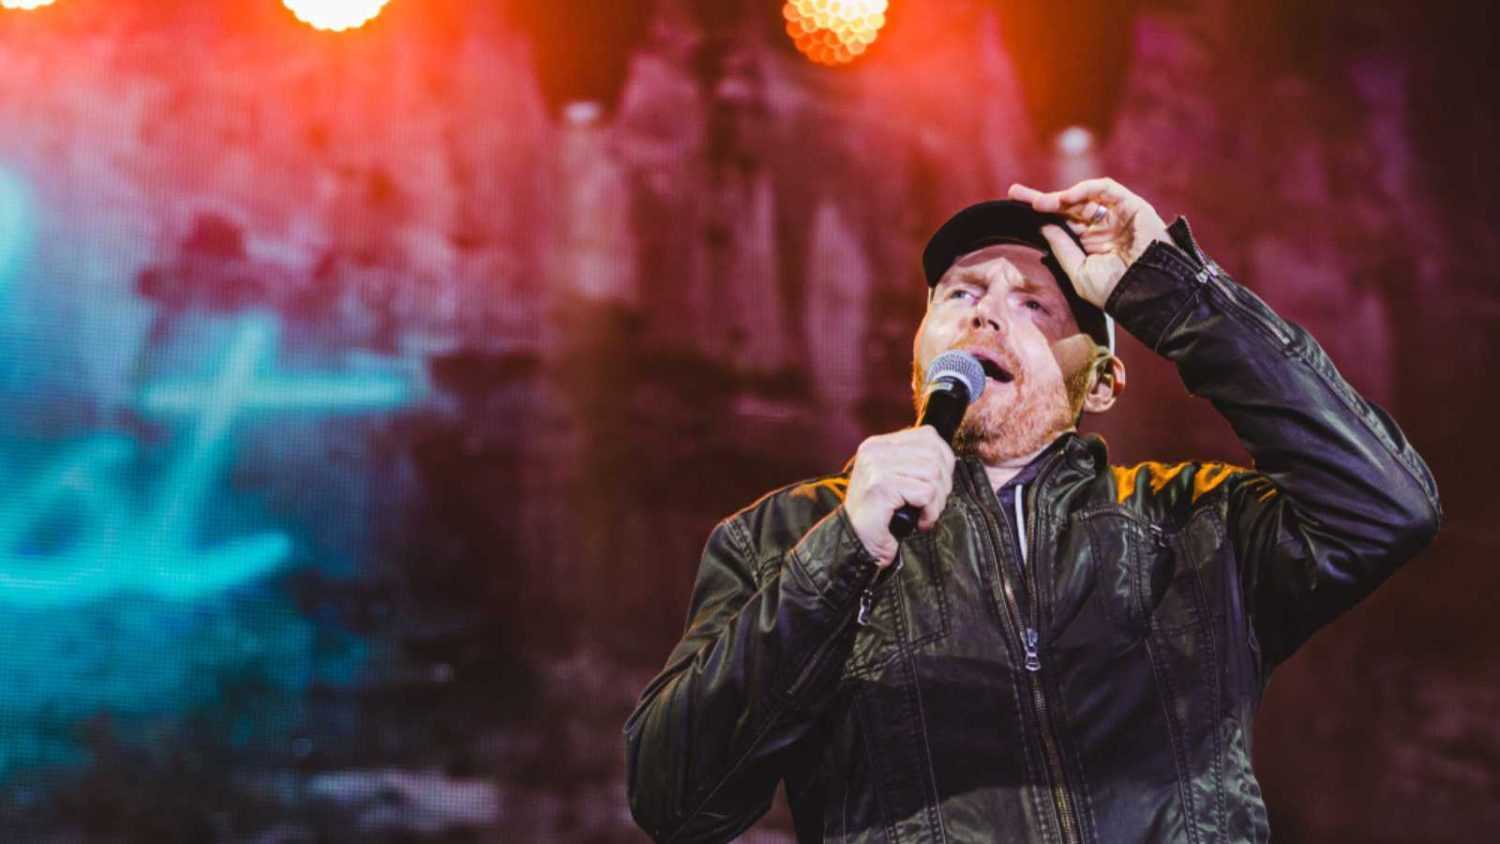 San Francisco, California / United States - June 21 2019 - Comedian Bill Burr performs at Clusterfest